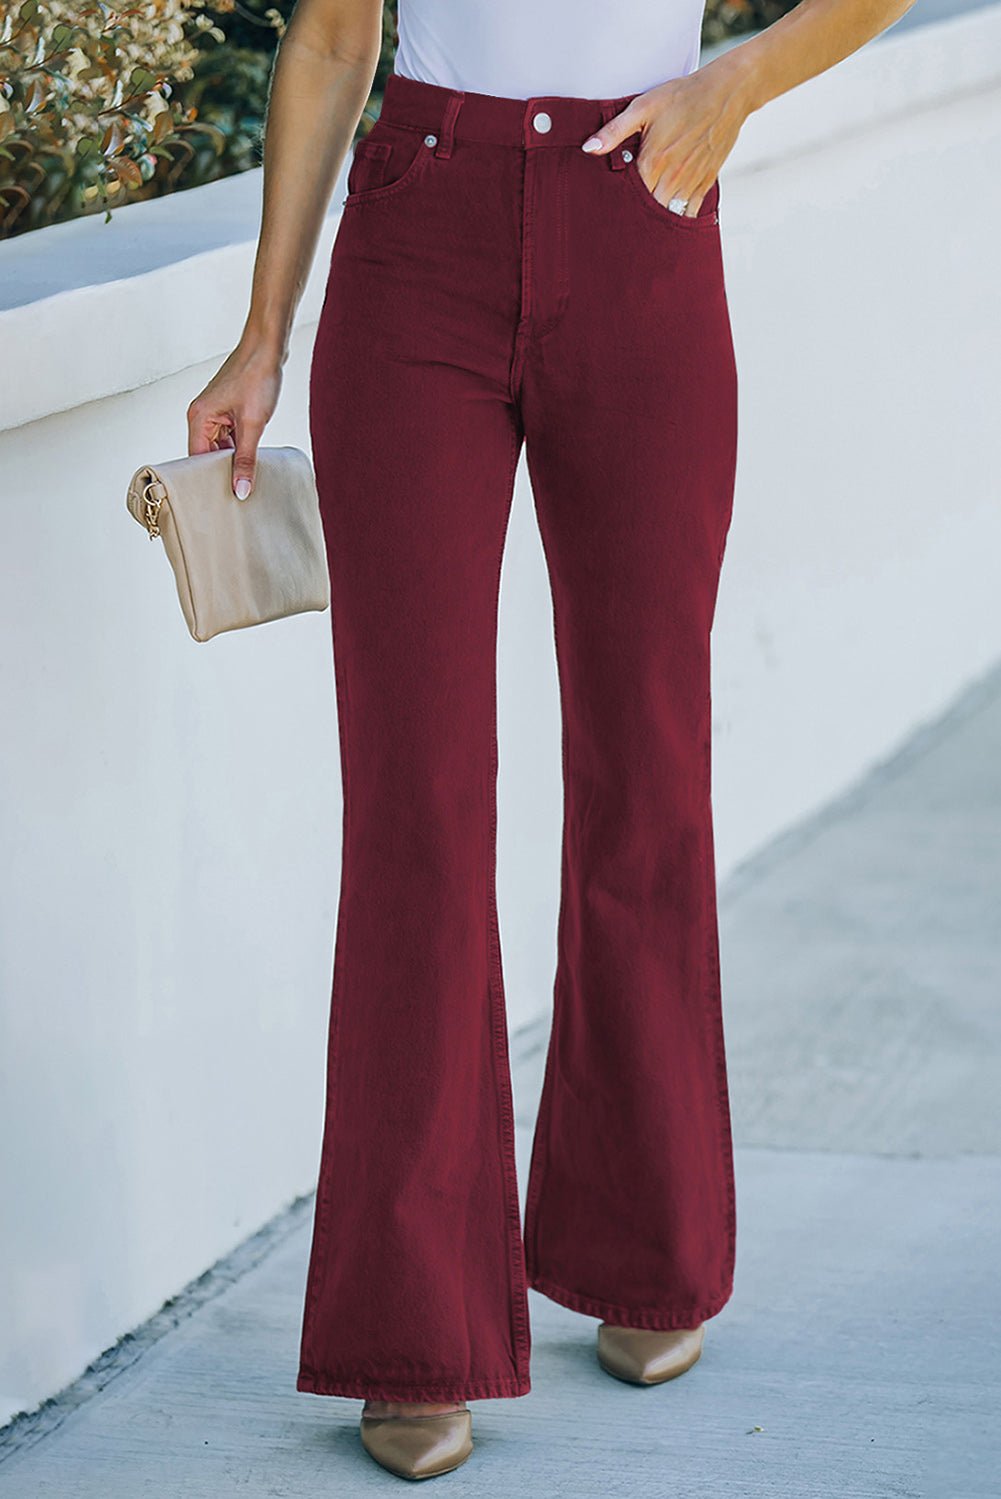 High Waist Flare Leg Jeans with Pockets - Fashion Girl Online Store